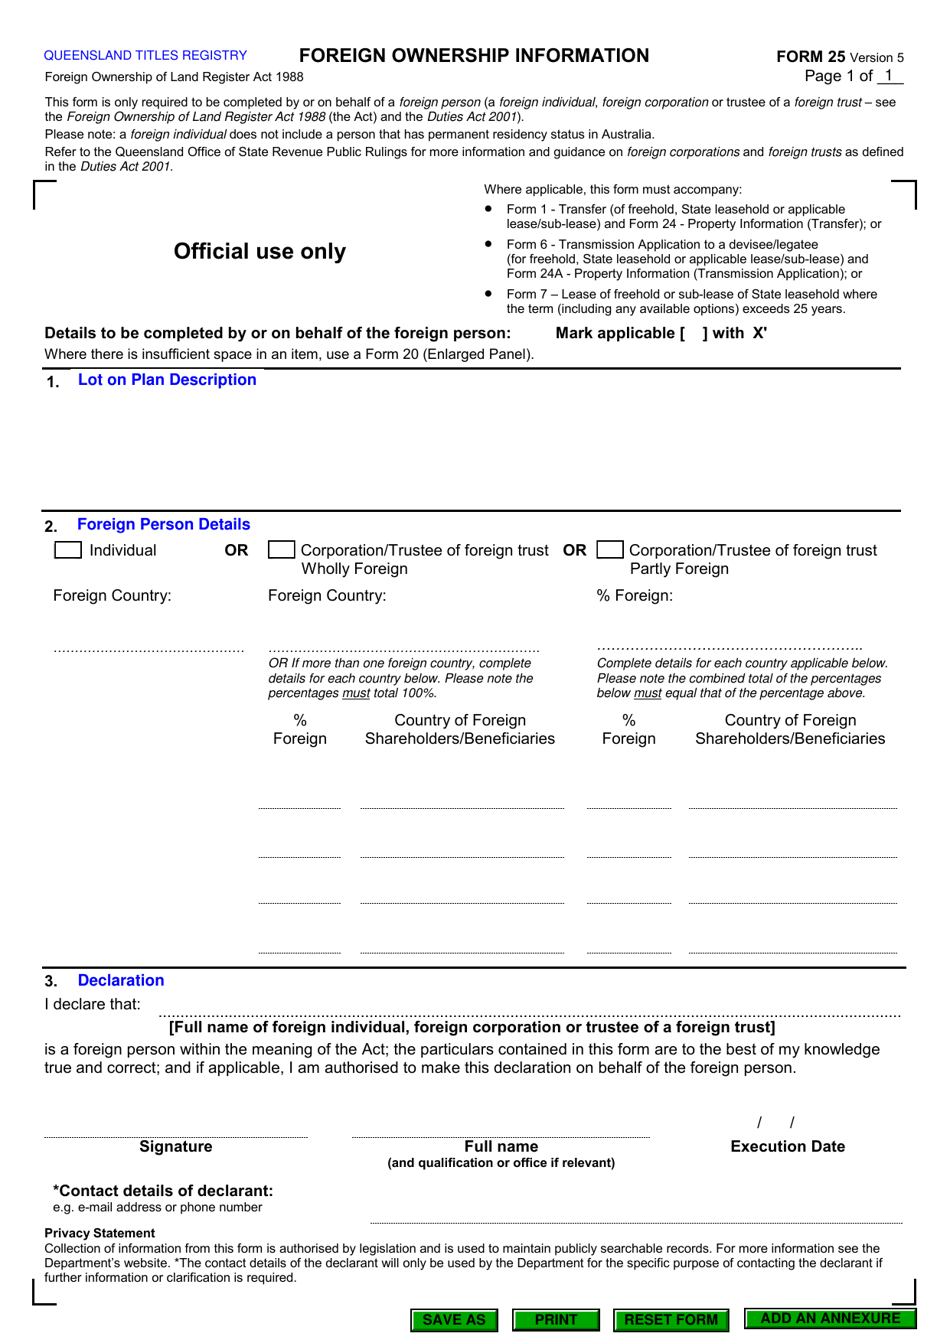 Form 25 Foreign Ownership Information - Queensland, Australia, Page 1